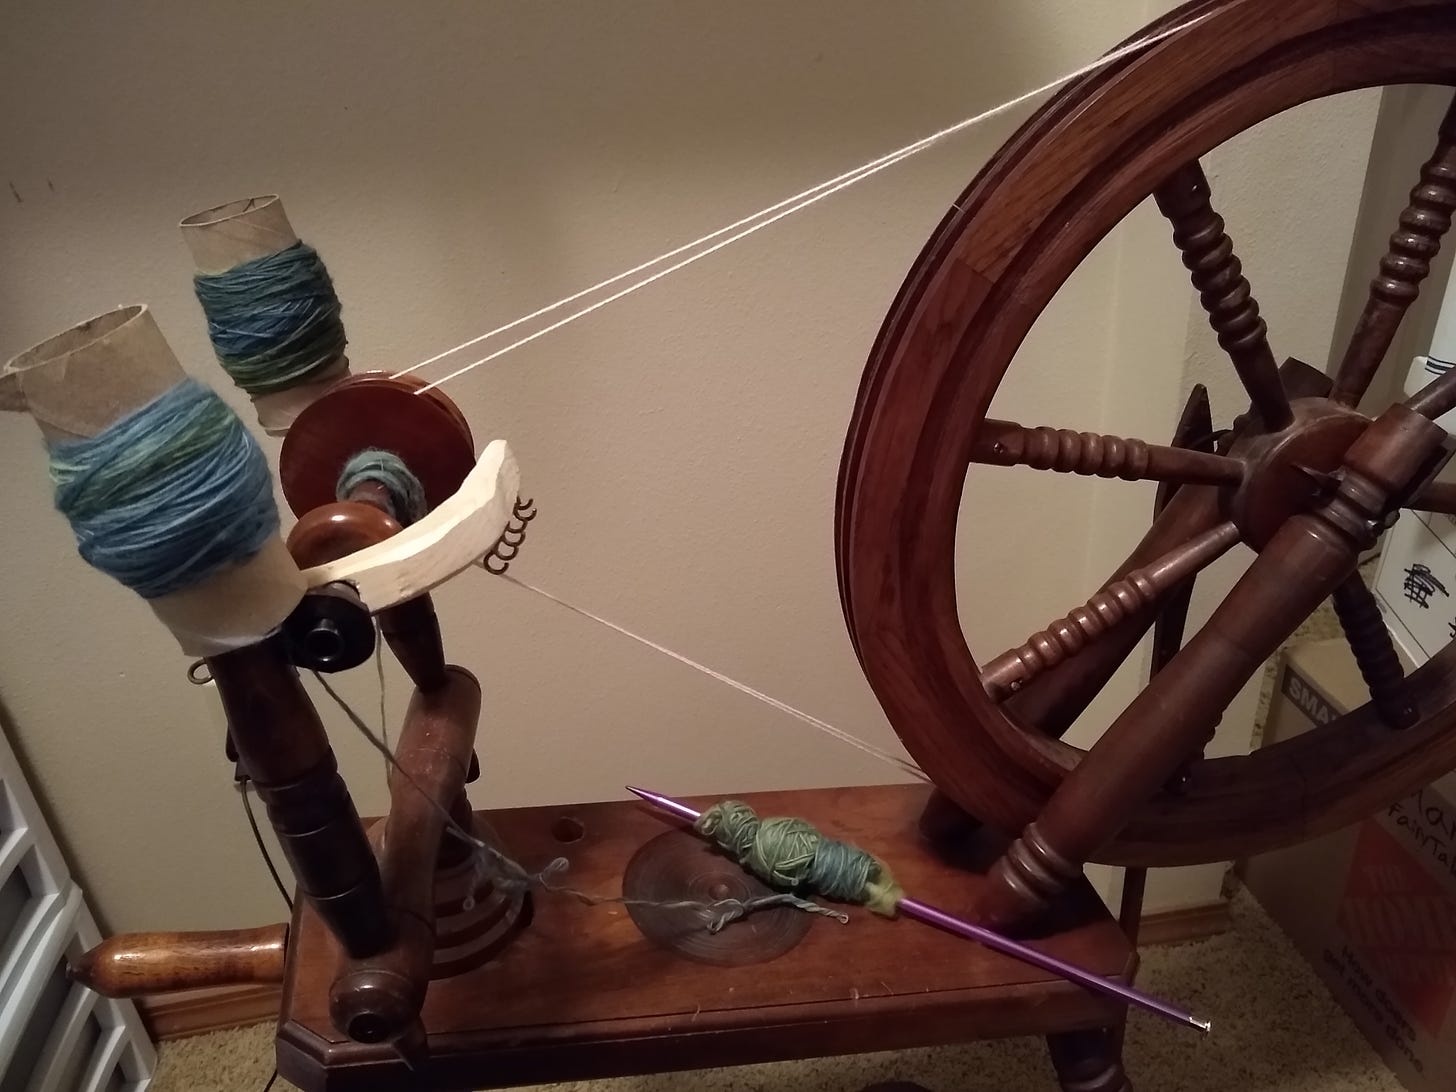 A spinning wheel with two toilet paper rolls of yarn on upright posts, and yarn wound onto a knitting needle